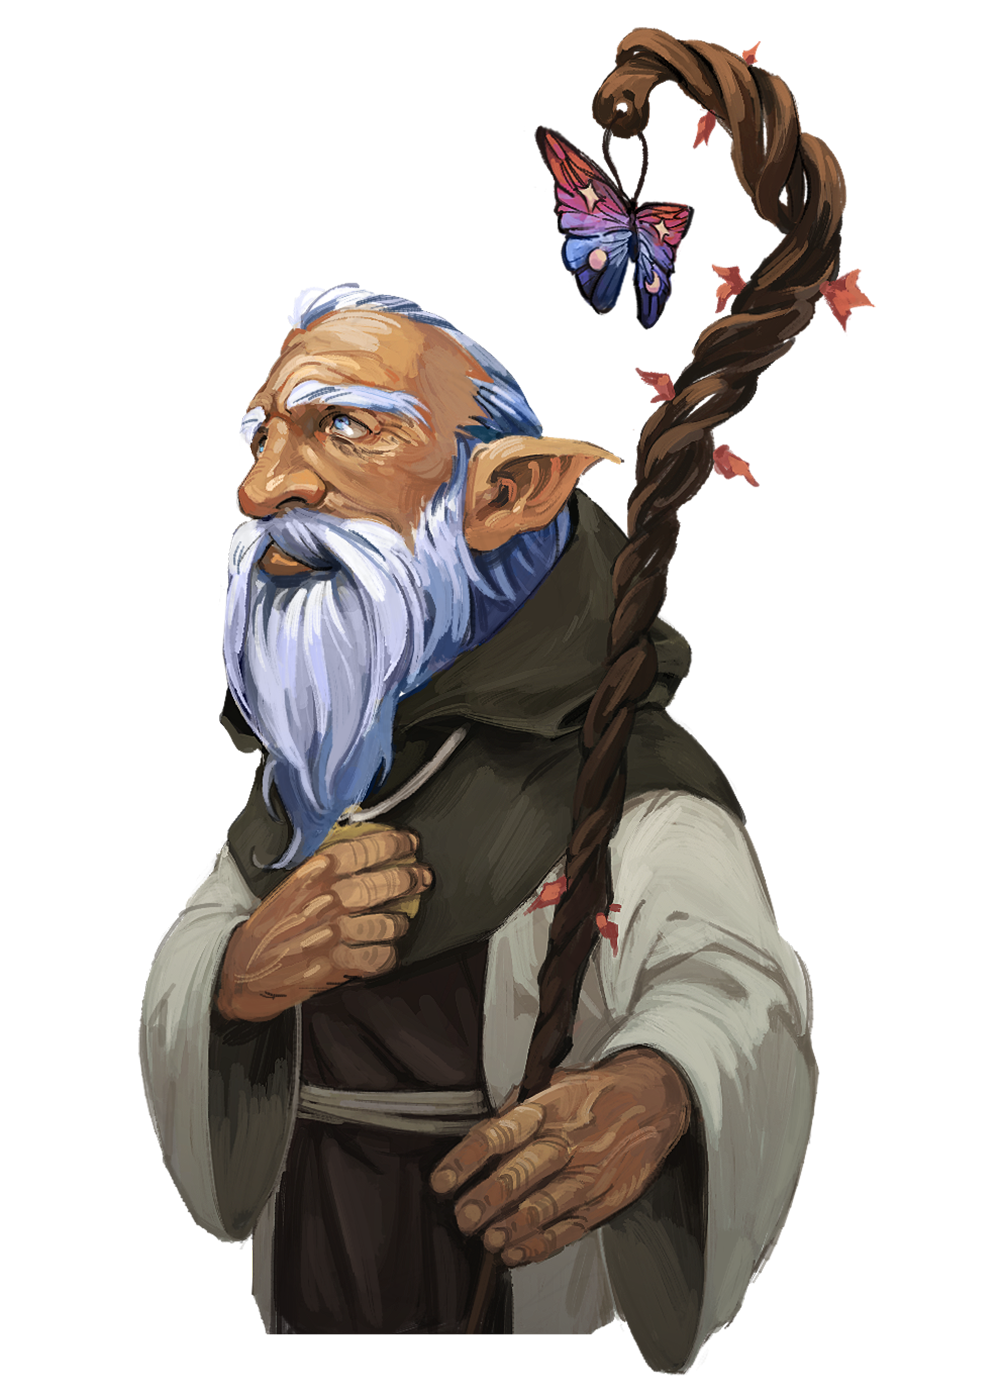 A older gnome holding a staff with a butterfly decoration